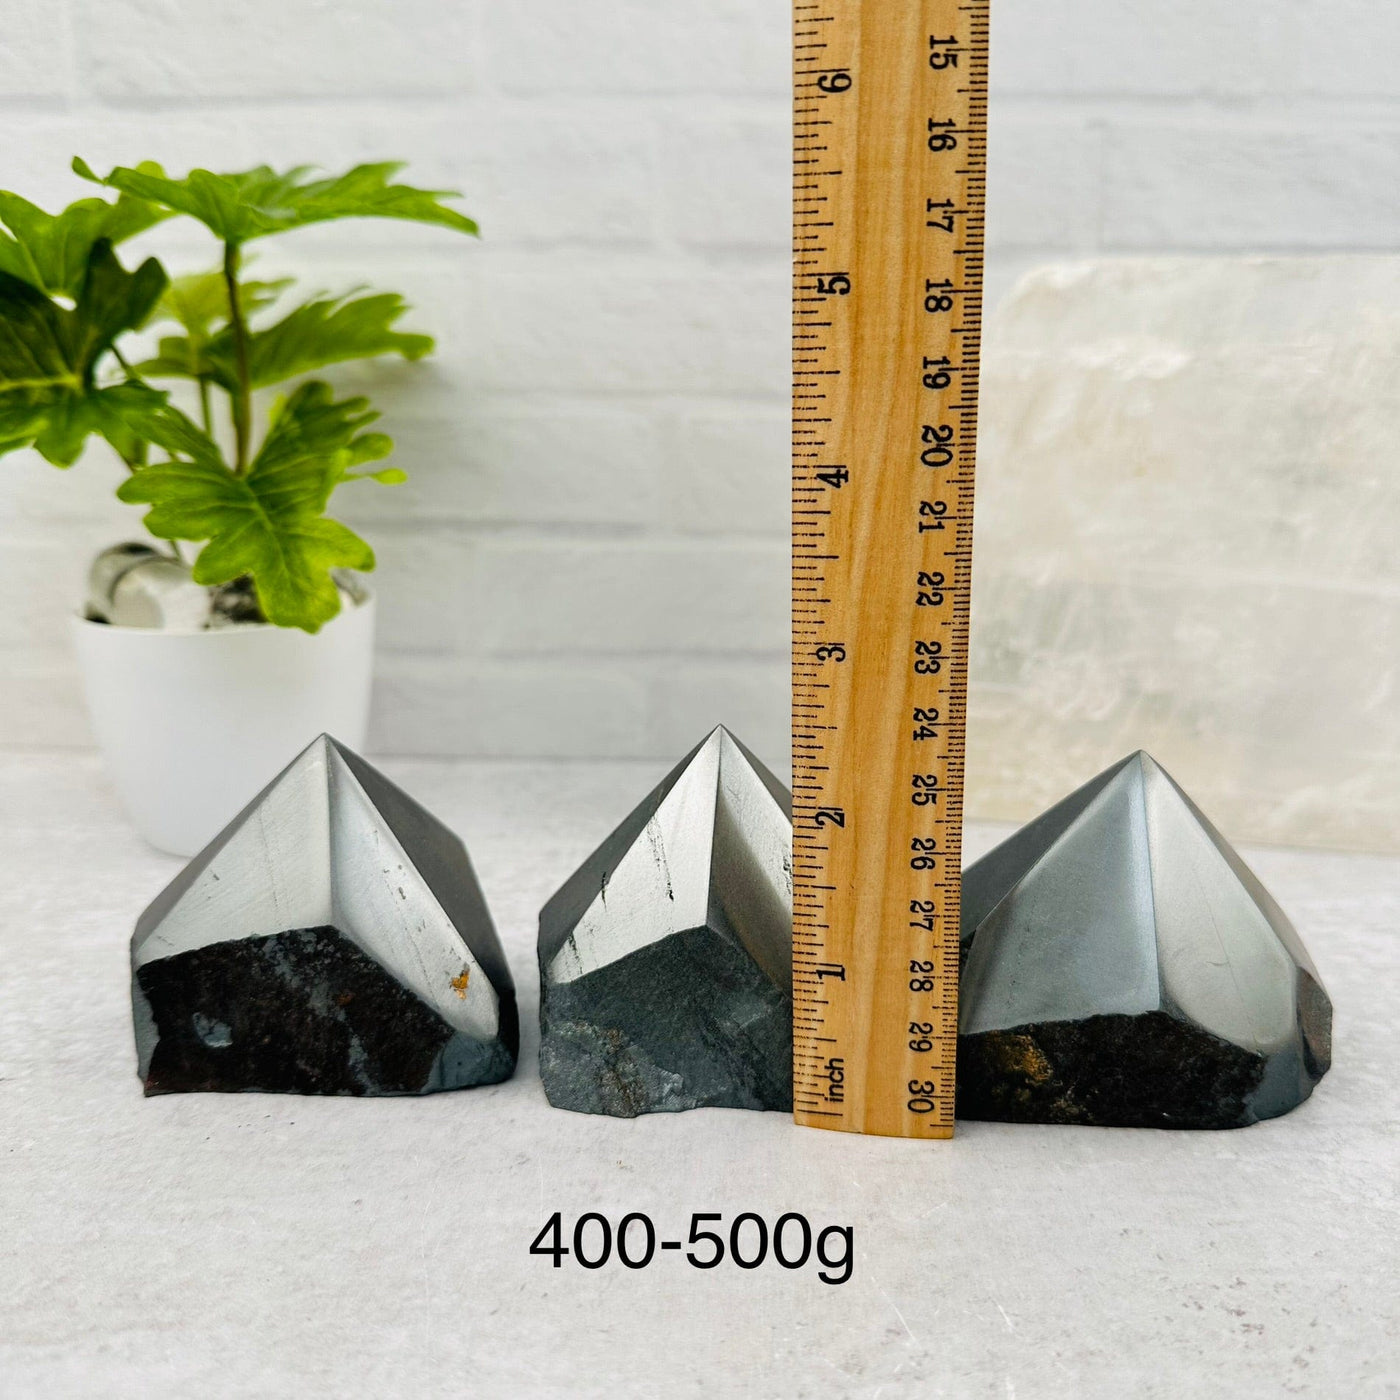 Hematite Semi-Polished Points - By Weight next to a ruler for size reference 